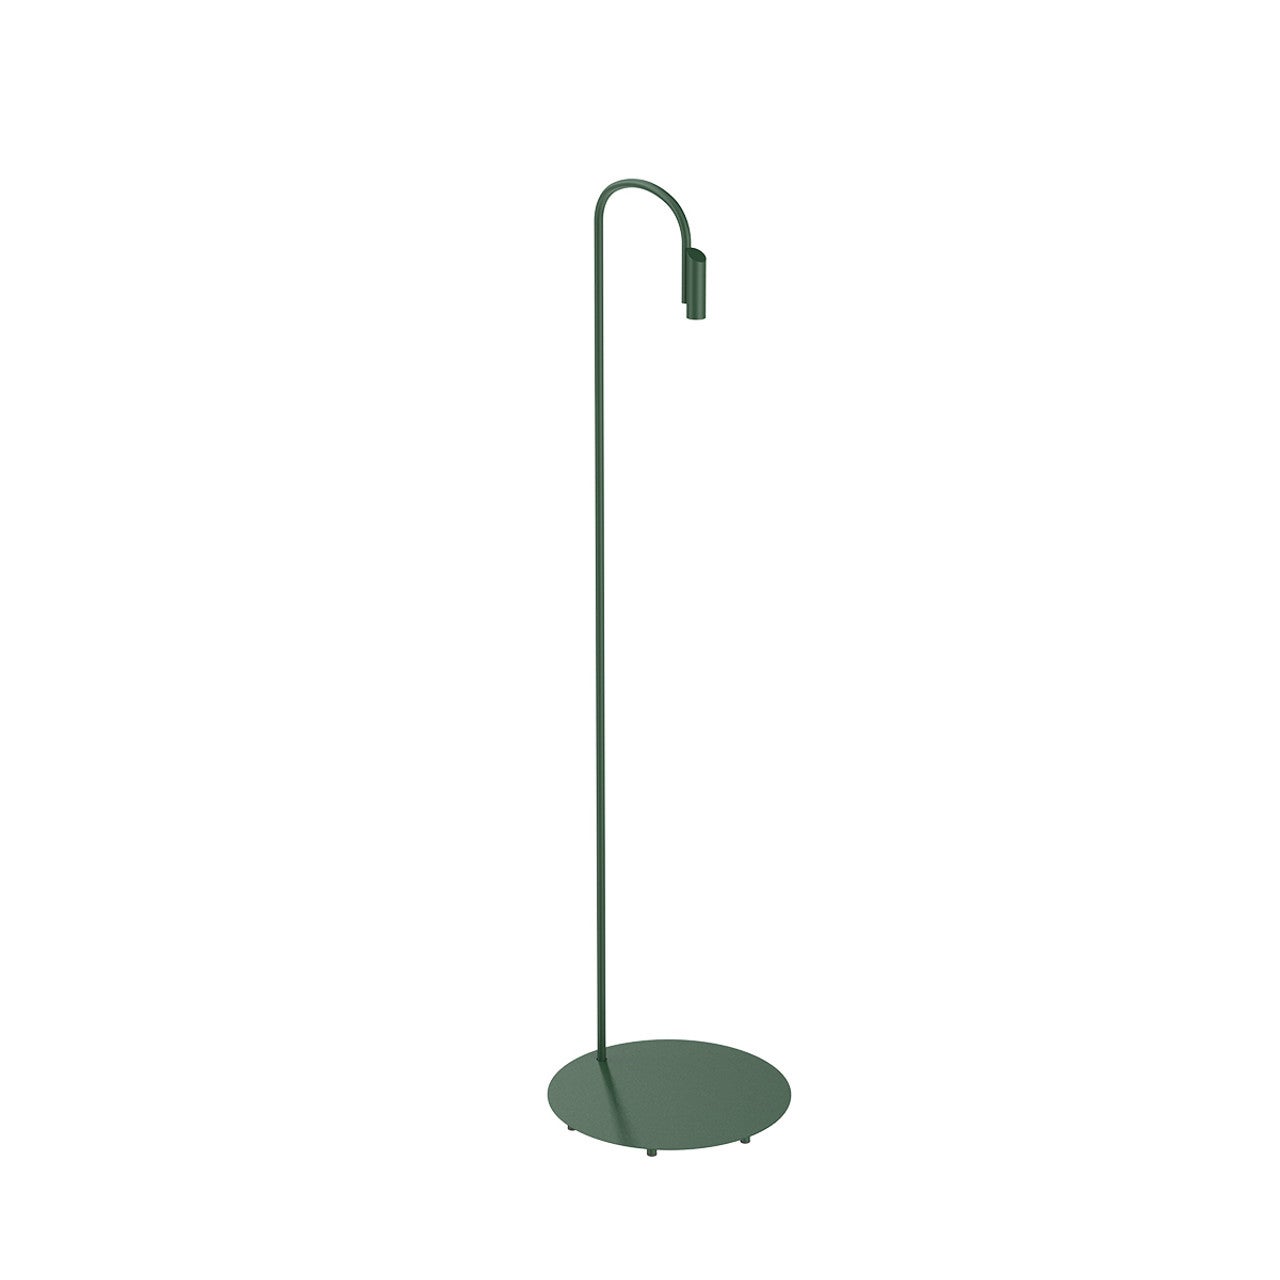 Flos Caule 2700K Model 4 Outdoor Floor Lamp in Forest Green with Regular Shade For Sale